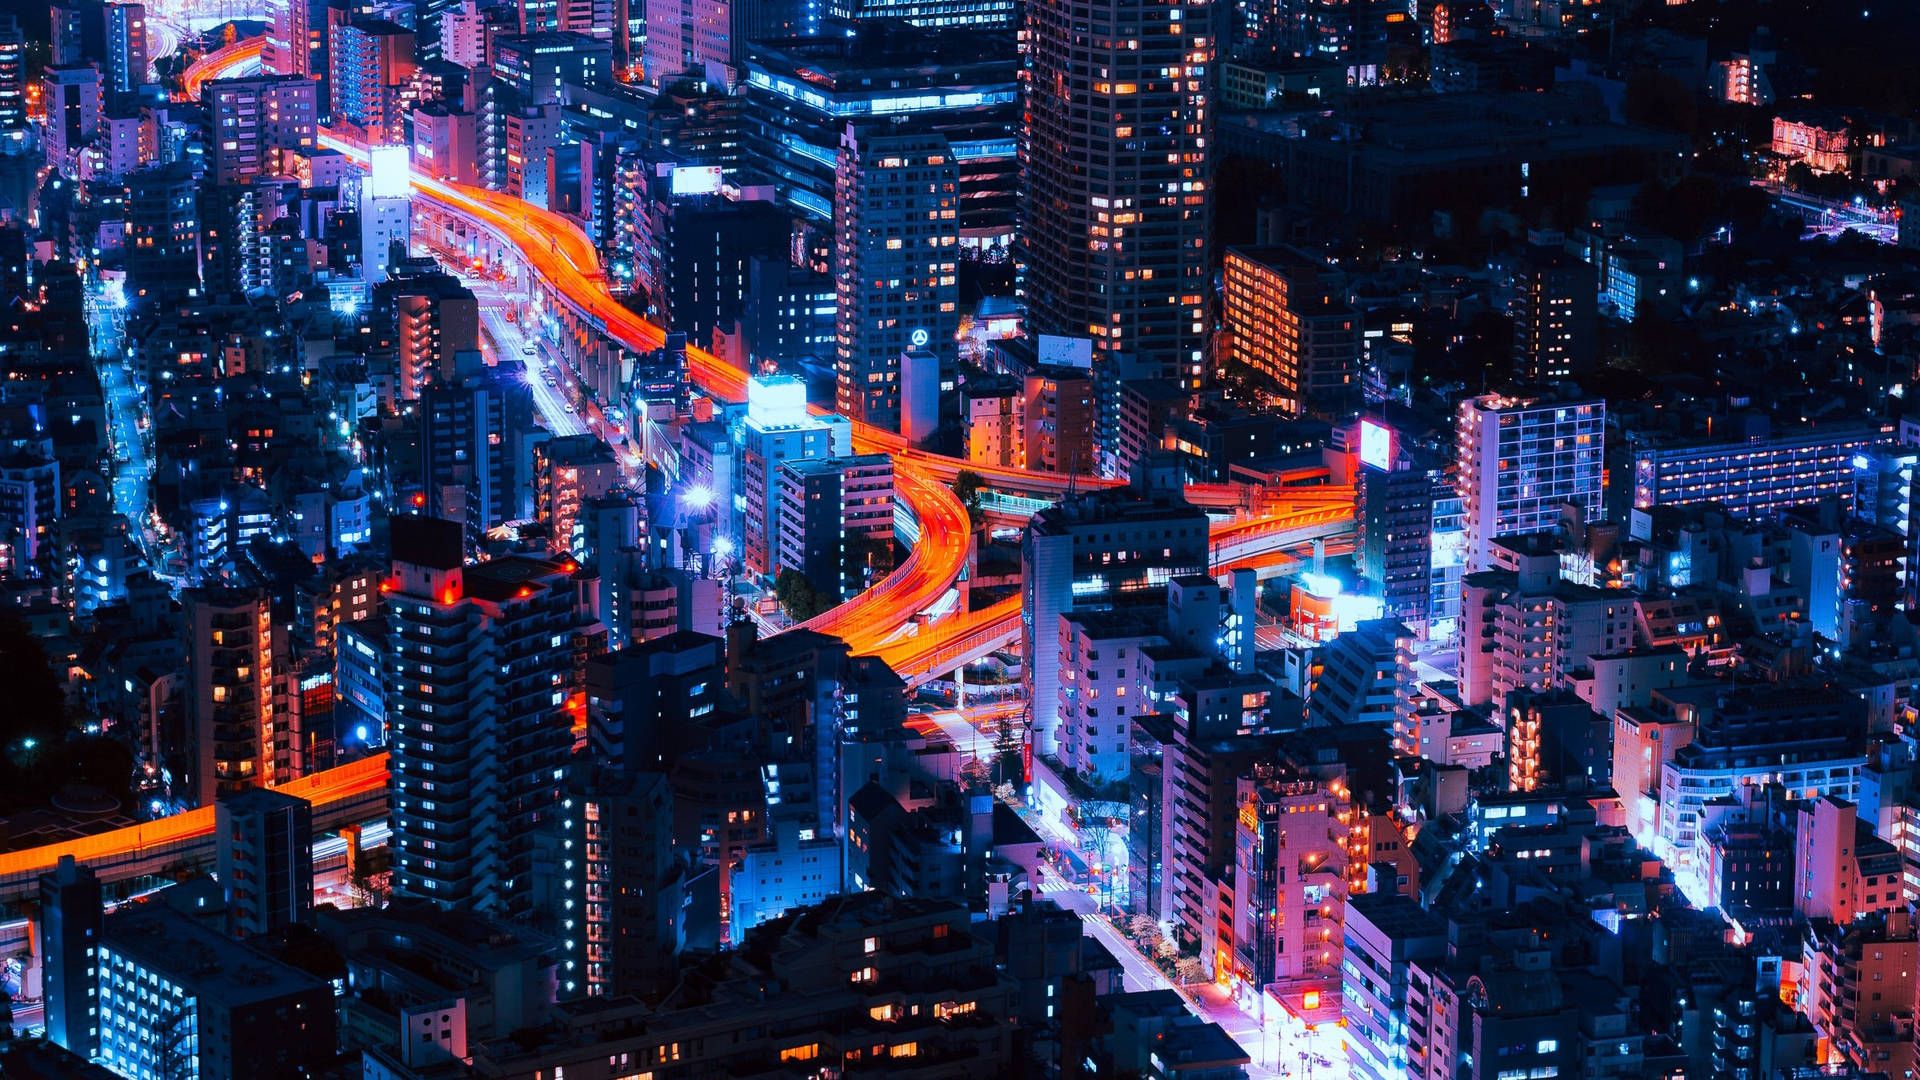 The lights of a city at night - Tokyo